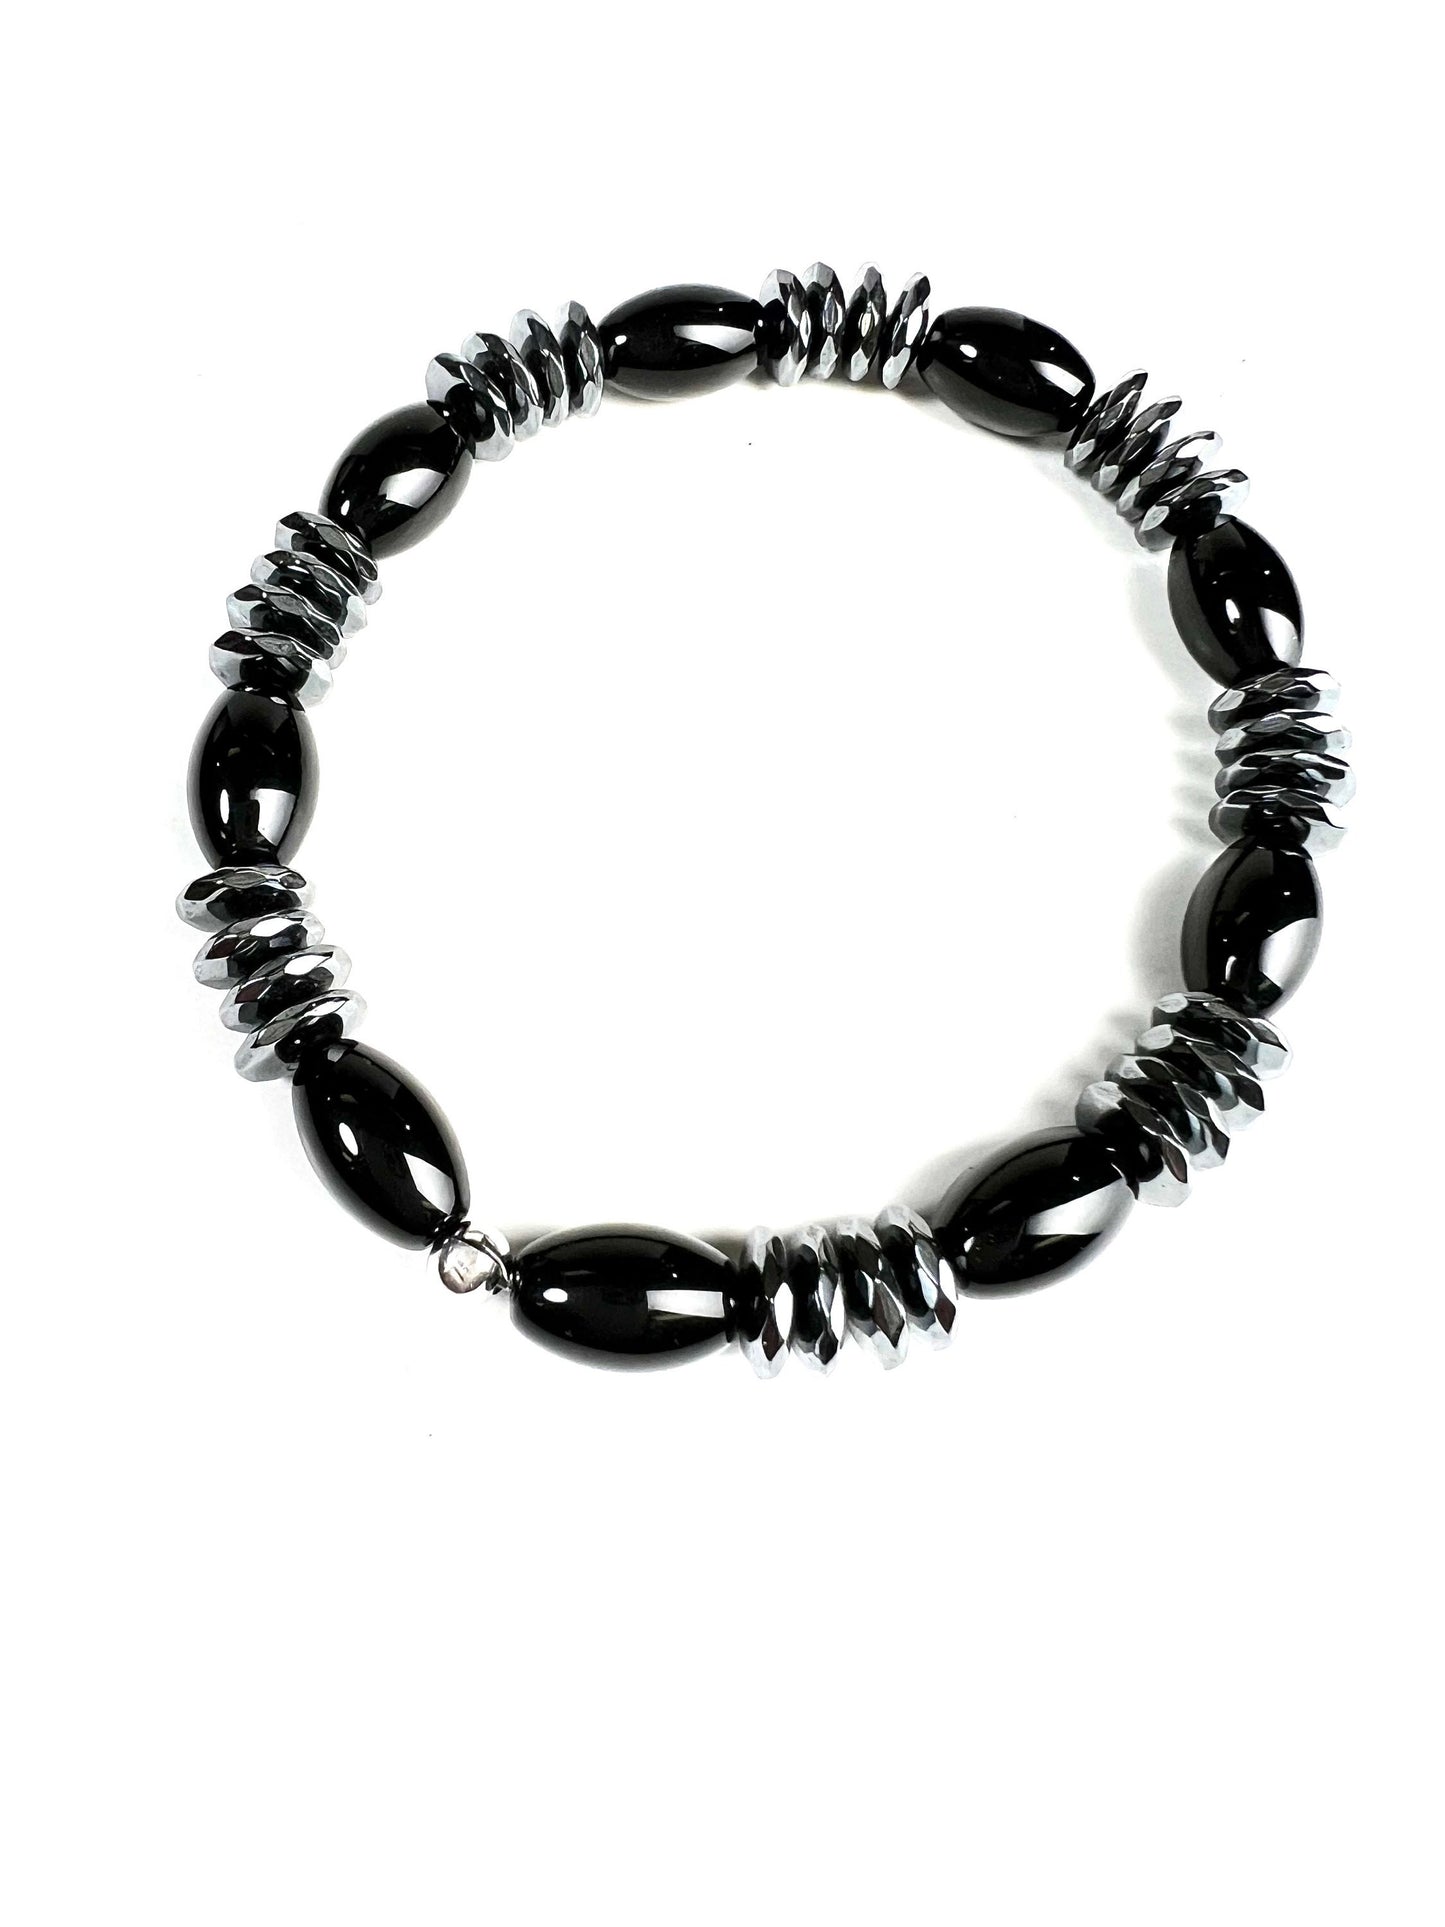 Black Onyx smooth oval with 10mm hematite faceted disc roundel AAA quality beaded Stretchy Bracelet. Man’s gift energy protection strength